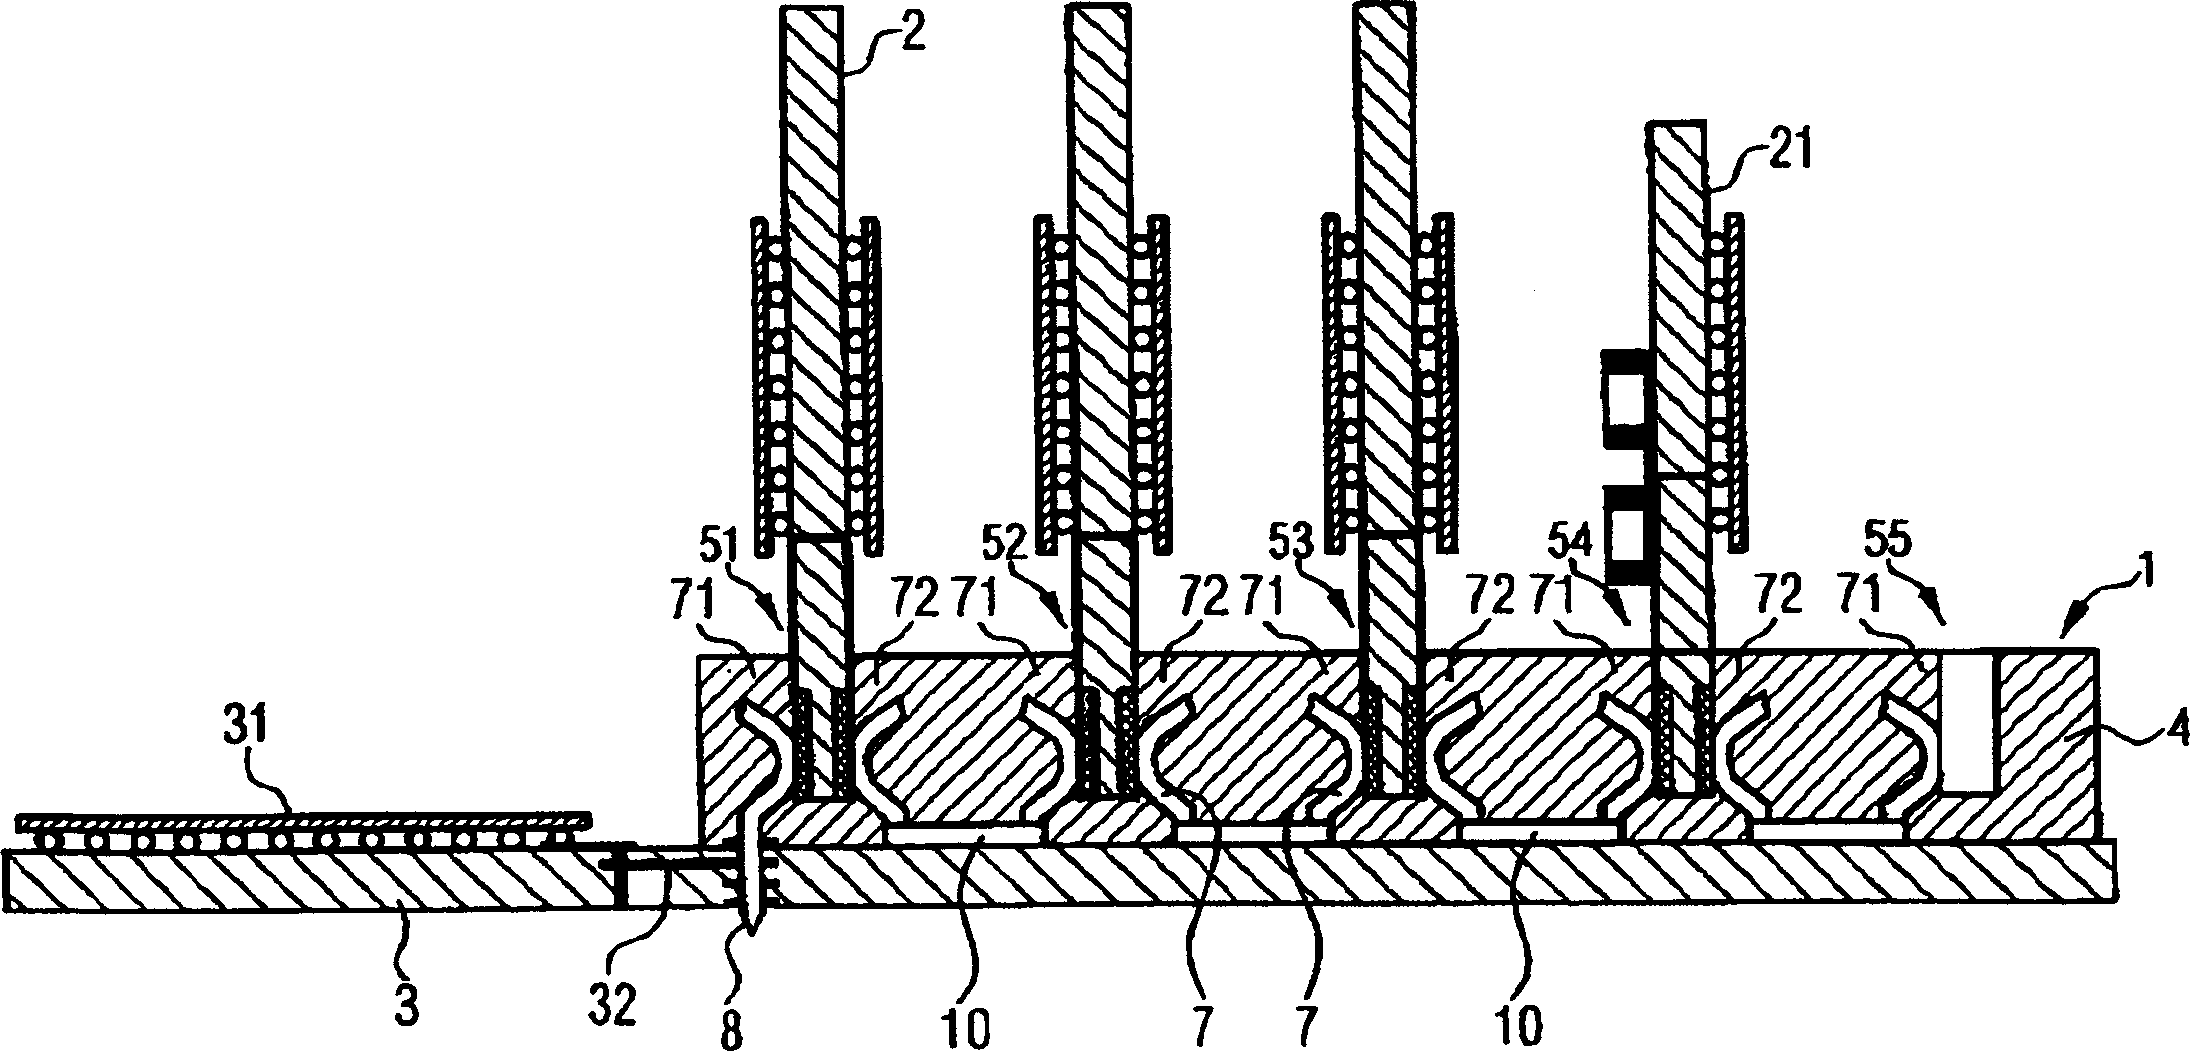 Connector with plural switching assemblies of compatible interface